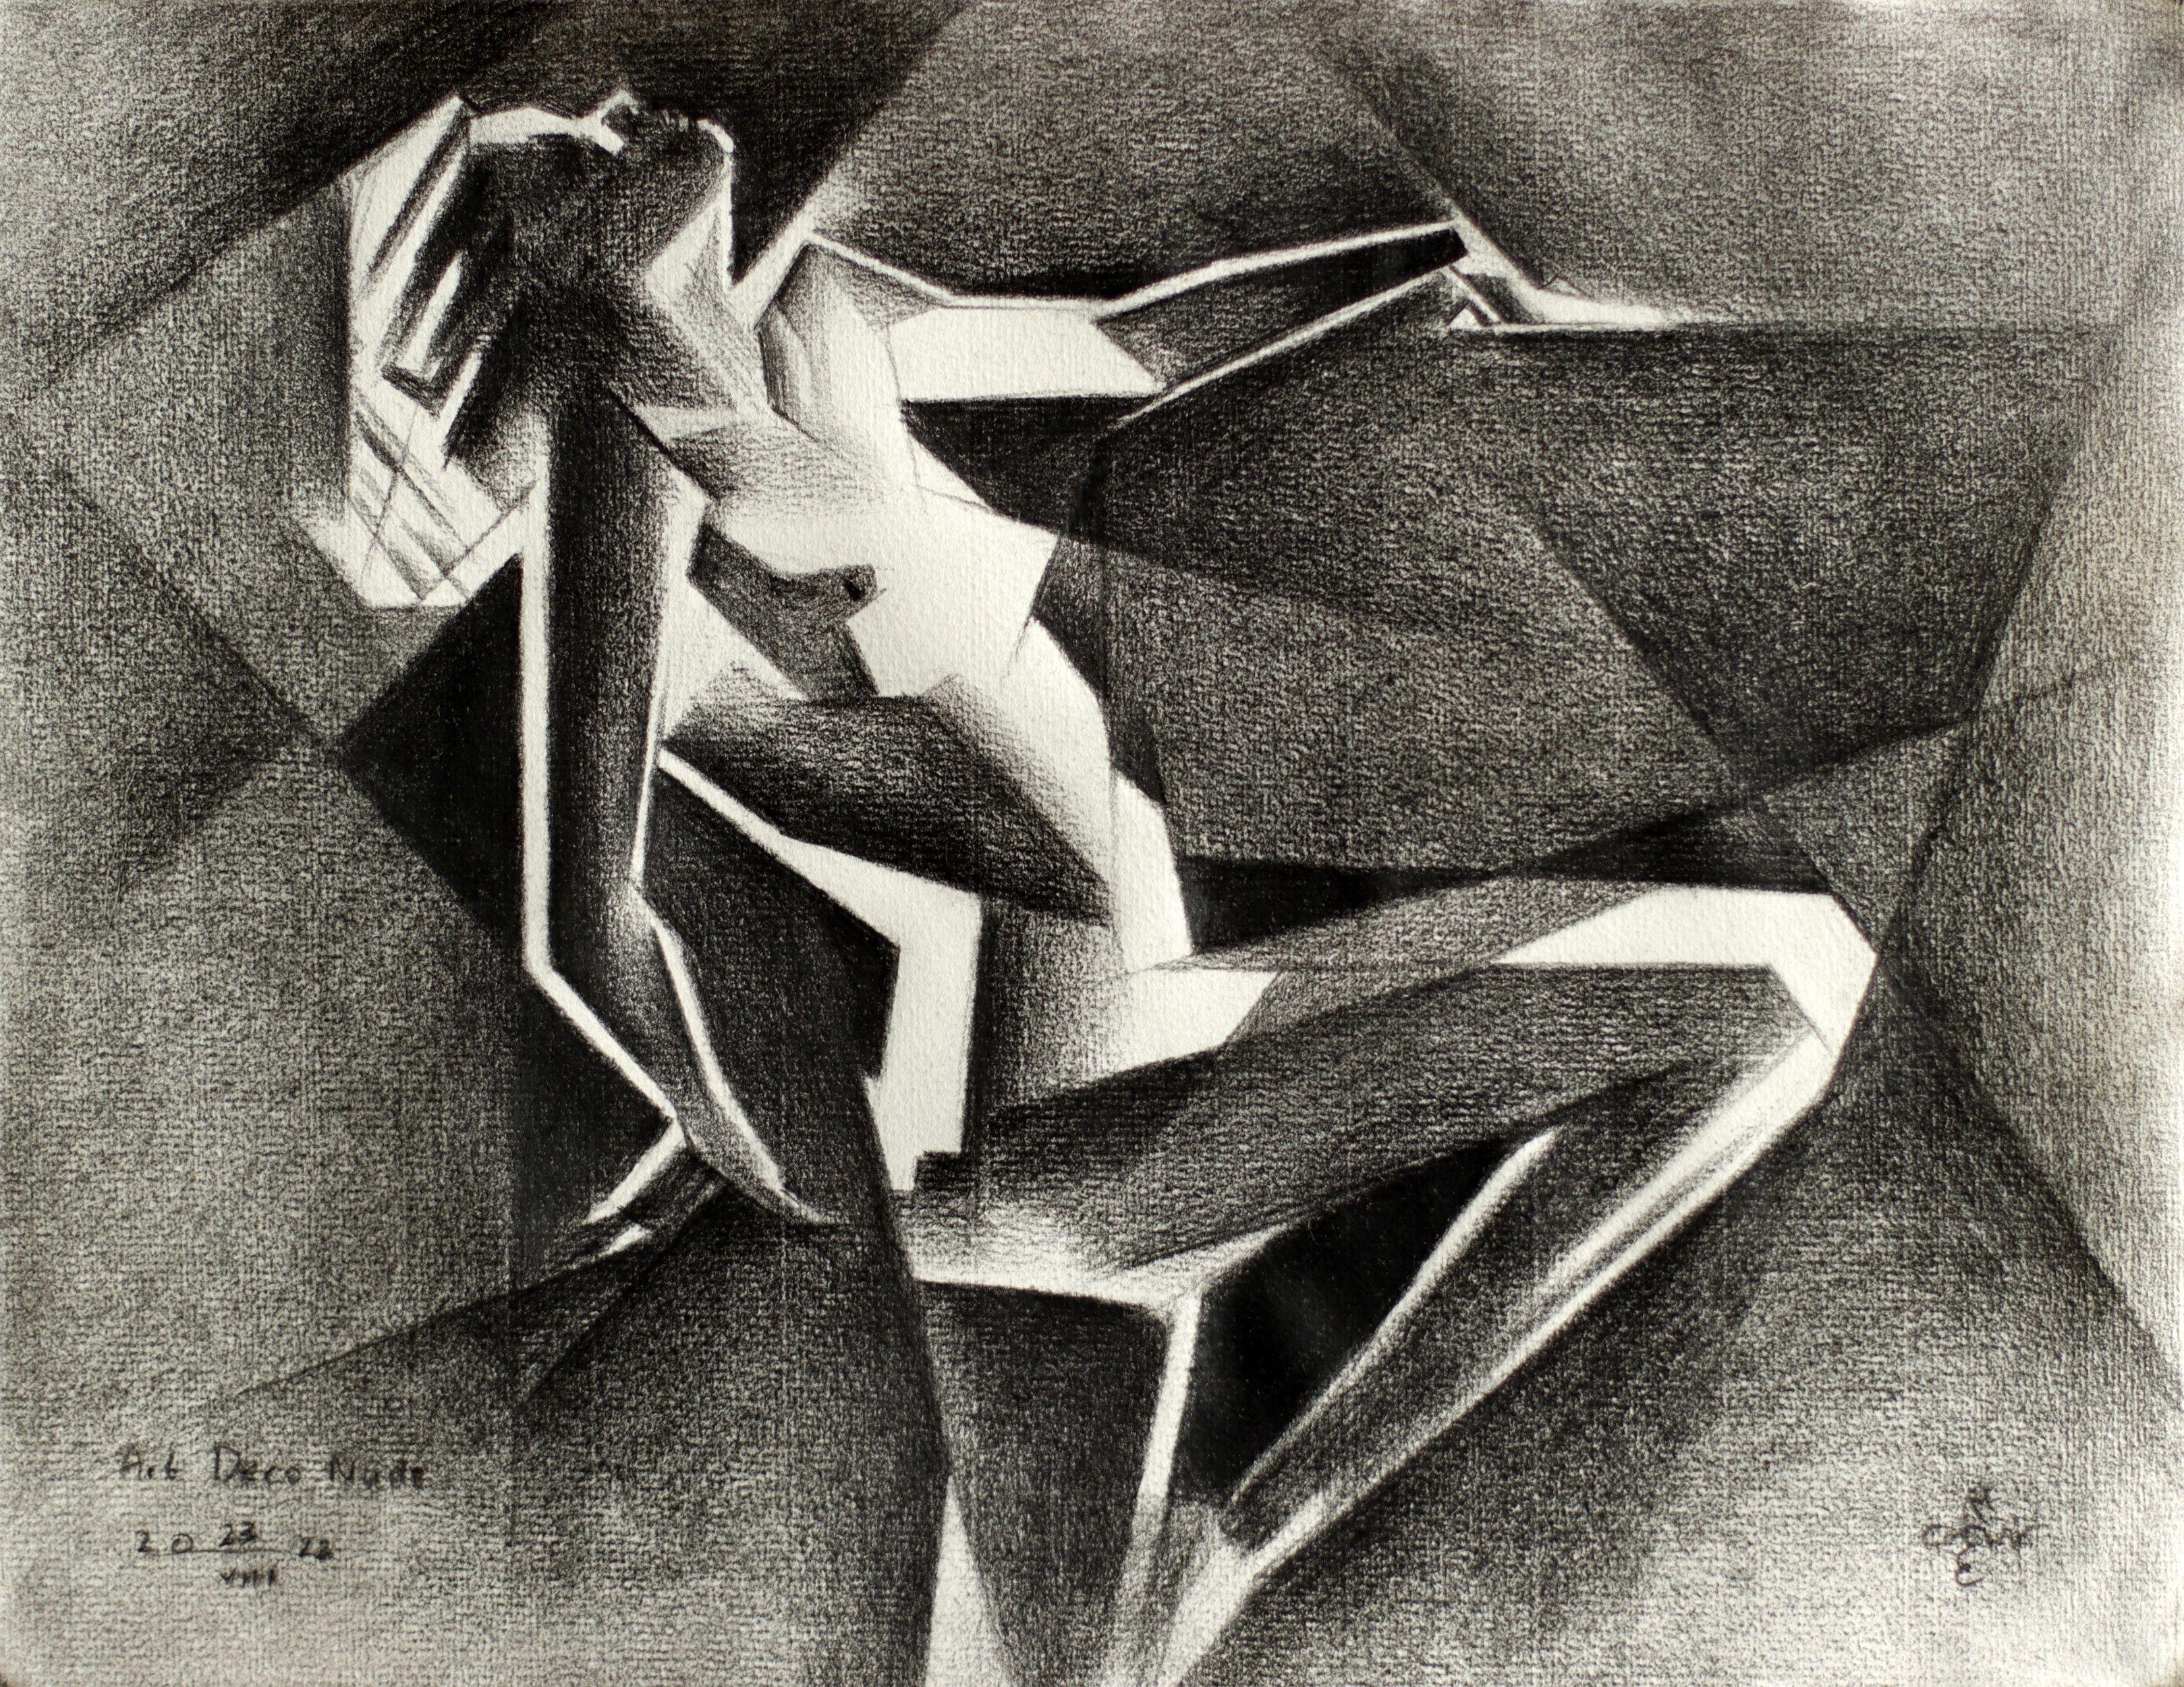 Movement    Another graphite pencil drawing â€˜Art Deco Nude â€“ 23-08-22â€™, inspired by again a smashing picture by Walter Bird. The last drawing shows a seated lady. Contrasts are always on my mind though. Not in the style but in movement this